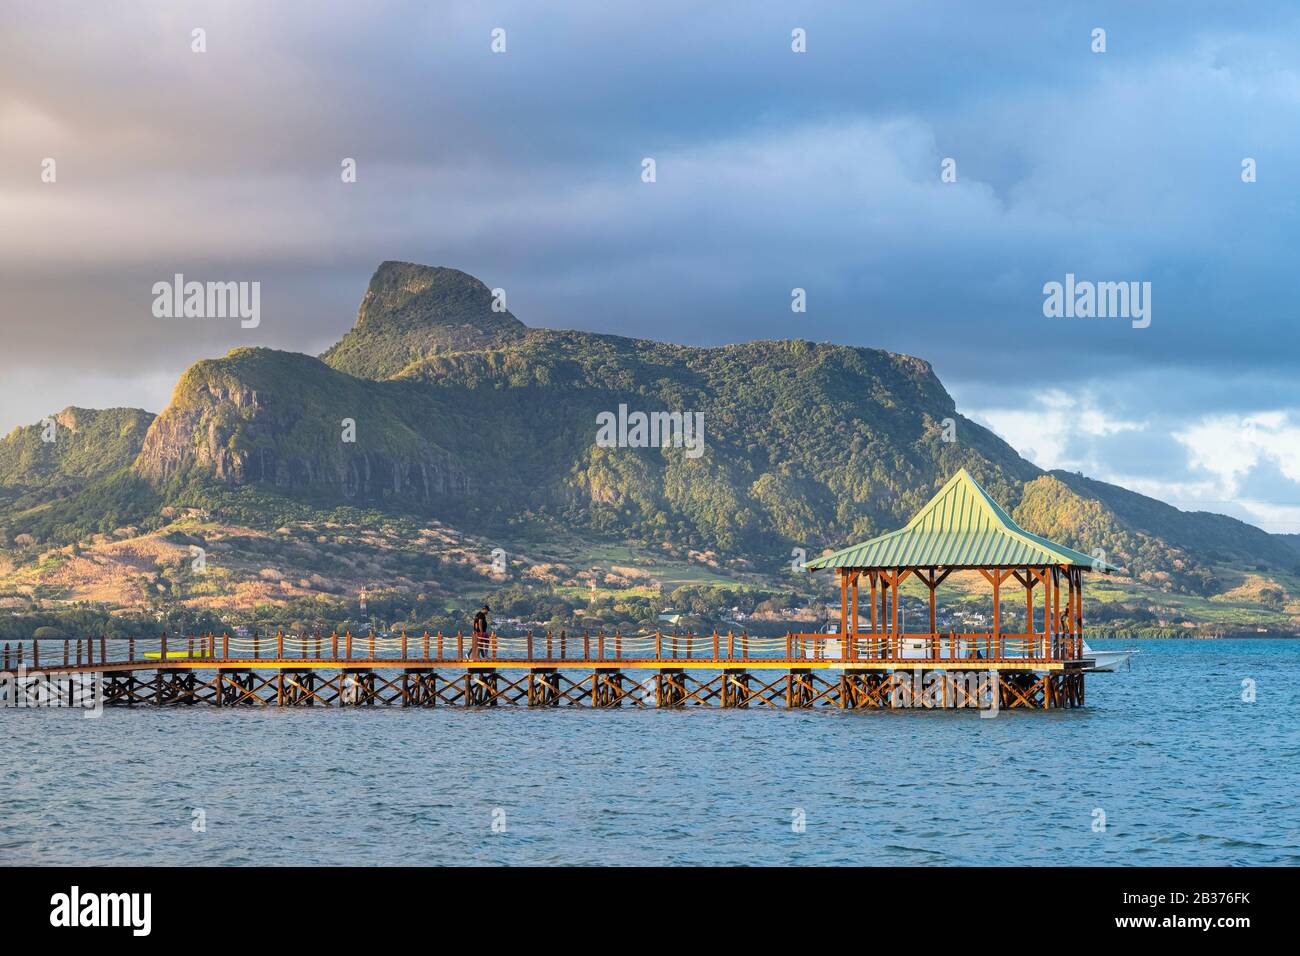 Mauritius Mahebourg Lion Mountain High Resolution Stock Photography and  Images - Alamy